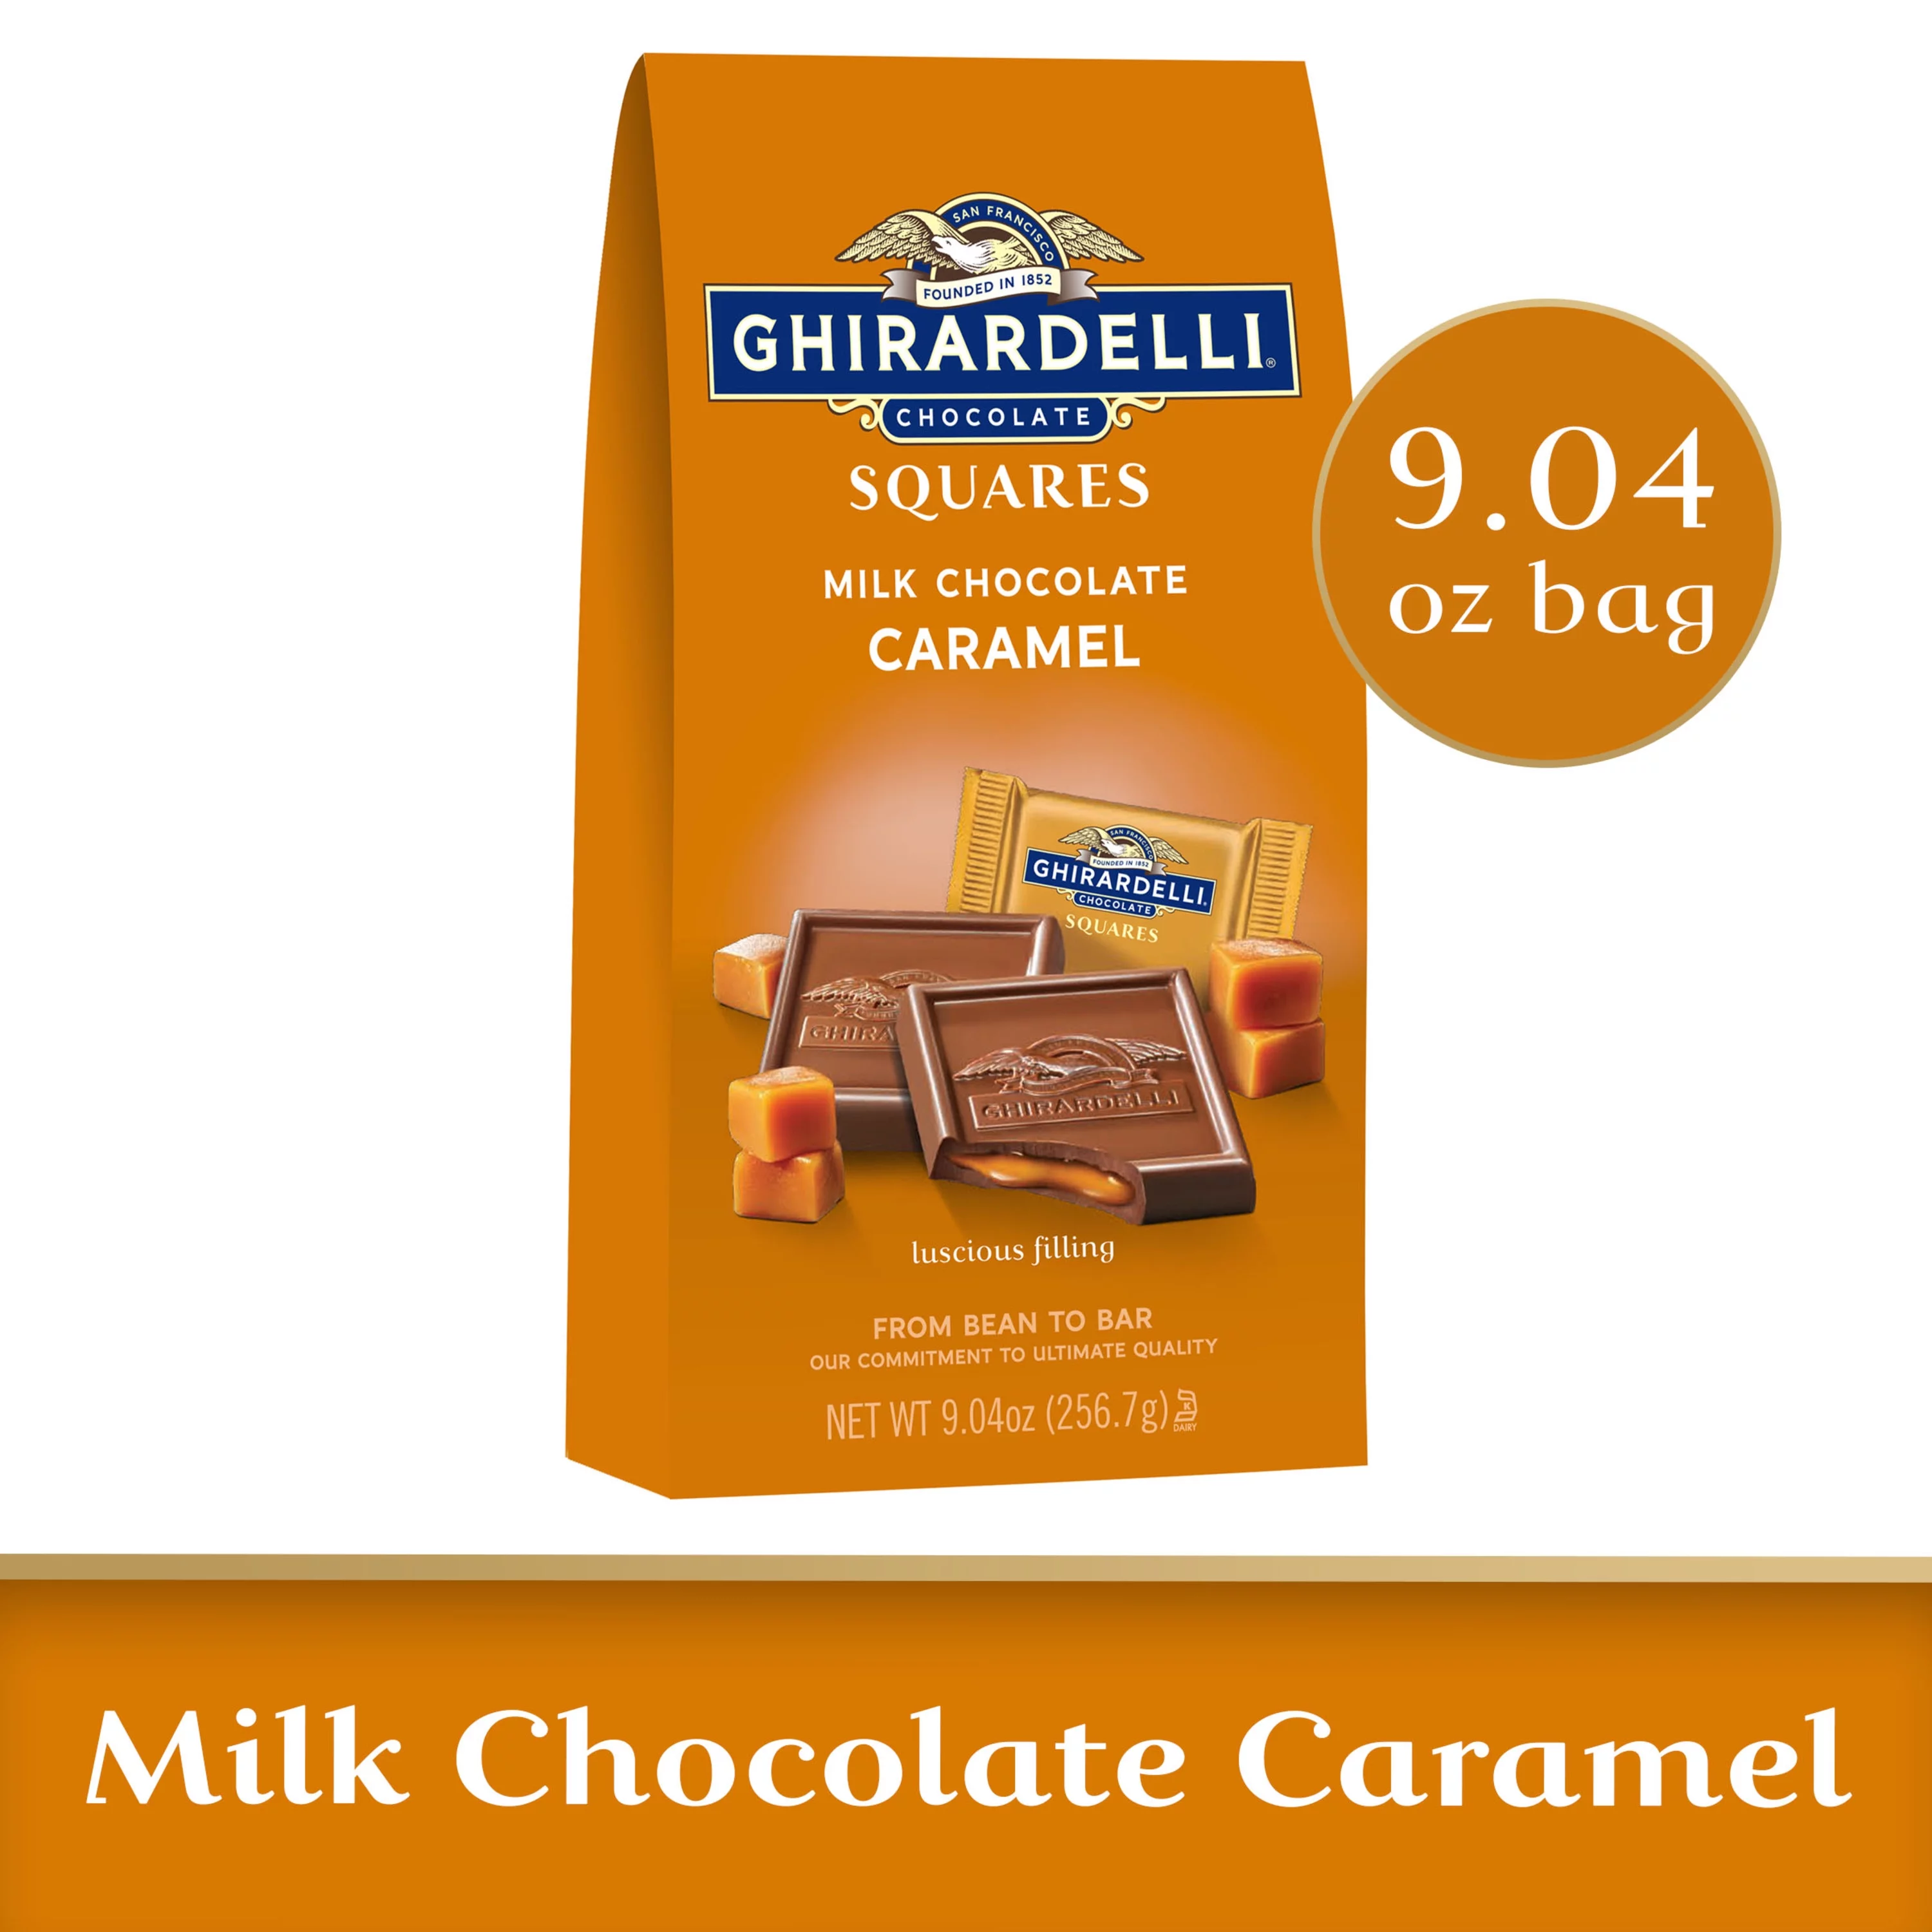 GHIRARDELLI Milk Chocolate Squares with Caramel Filling for Valentine’s Day Candy Gifts, 9.04 oz Bag